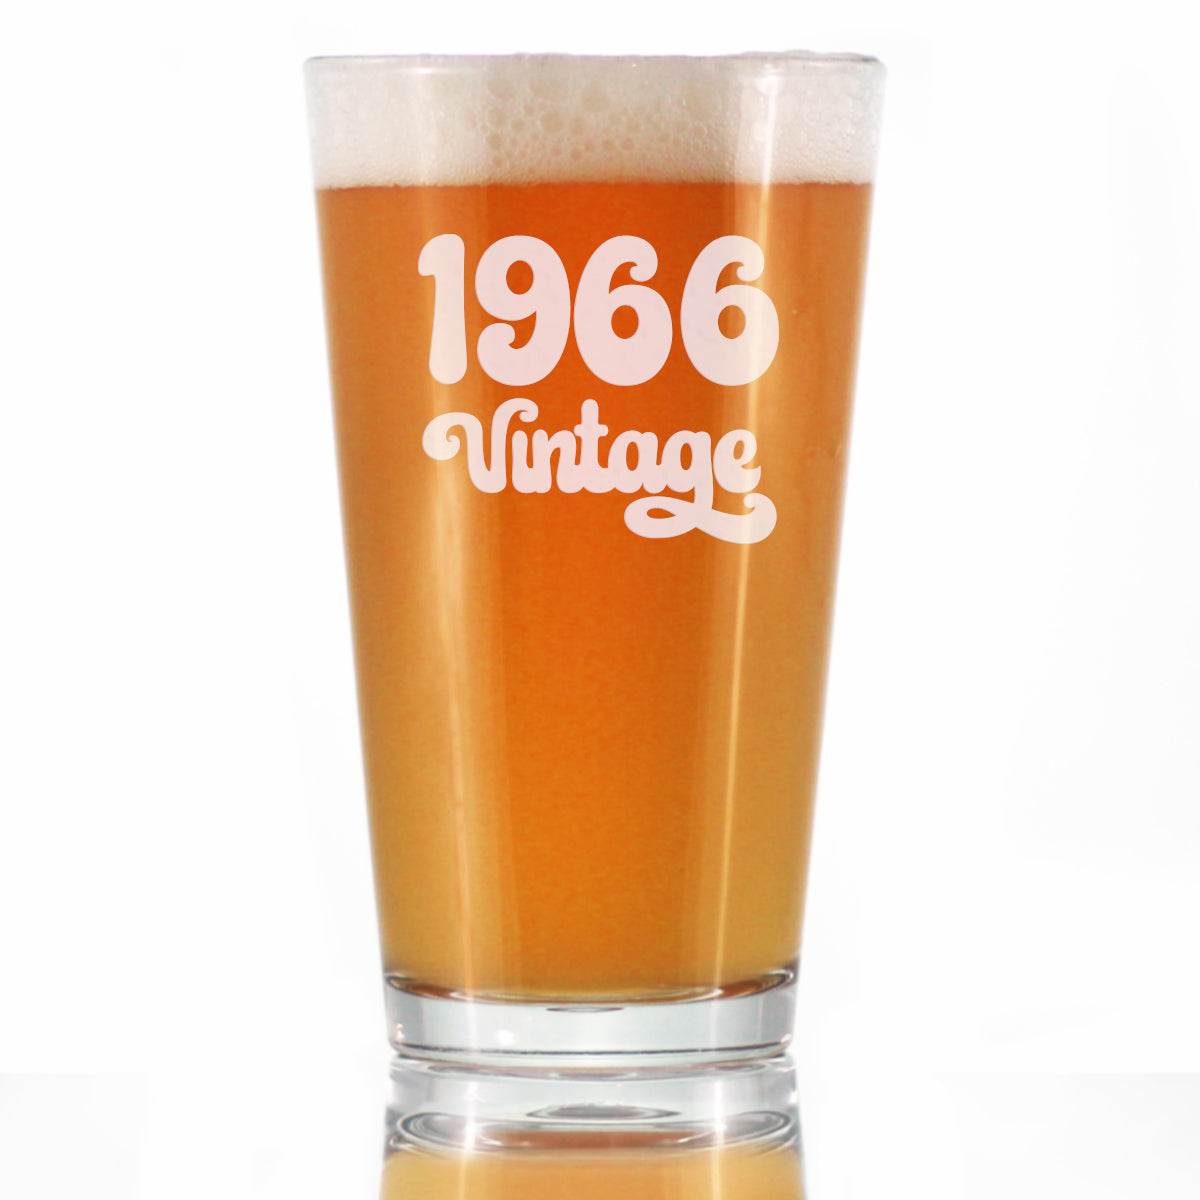 Vintage 1966 - Pint Glass for Beer - 58th Birthday Gifts for Men or Women Turning 58 - Fun Bday Party Decor - 16 oz